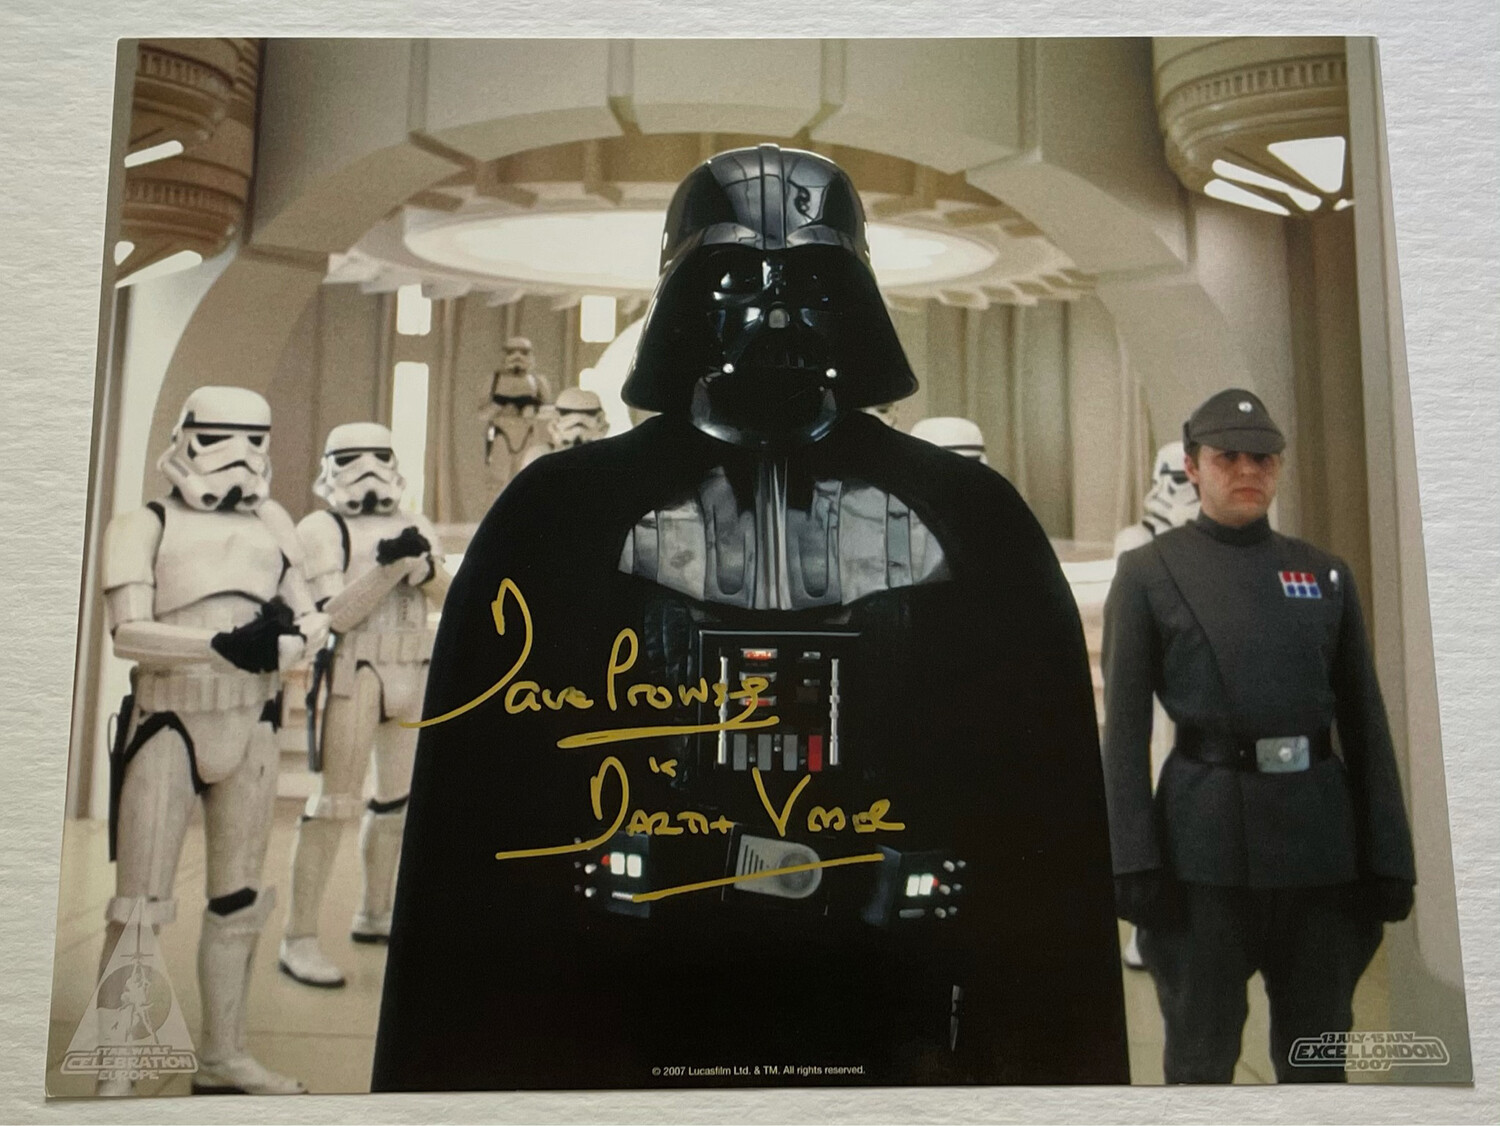 8X10 DARTH VADER PHOTO SIGNED BY DAVE PROWSE